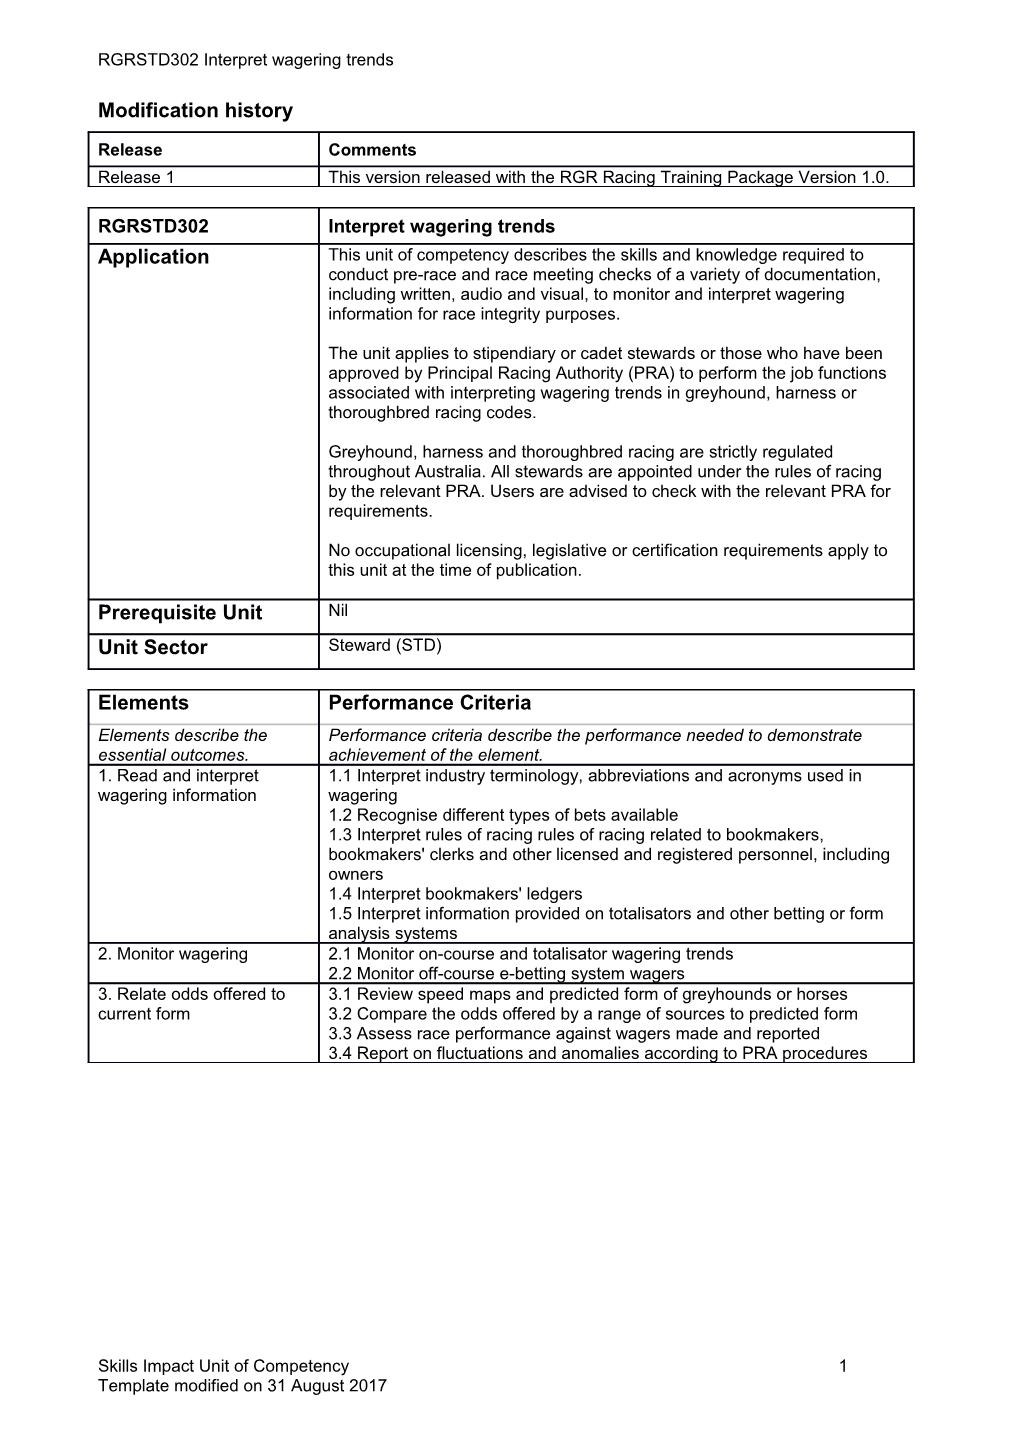 Skills Impact Unit of Competency Template s14